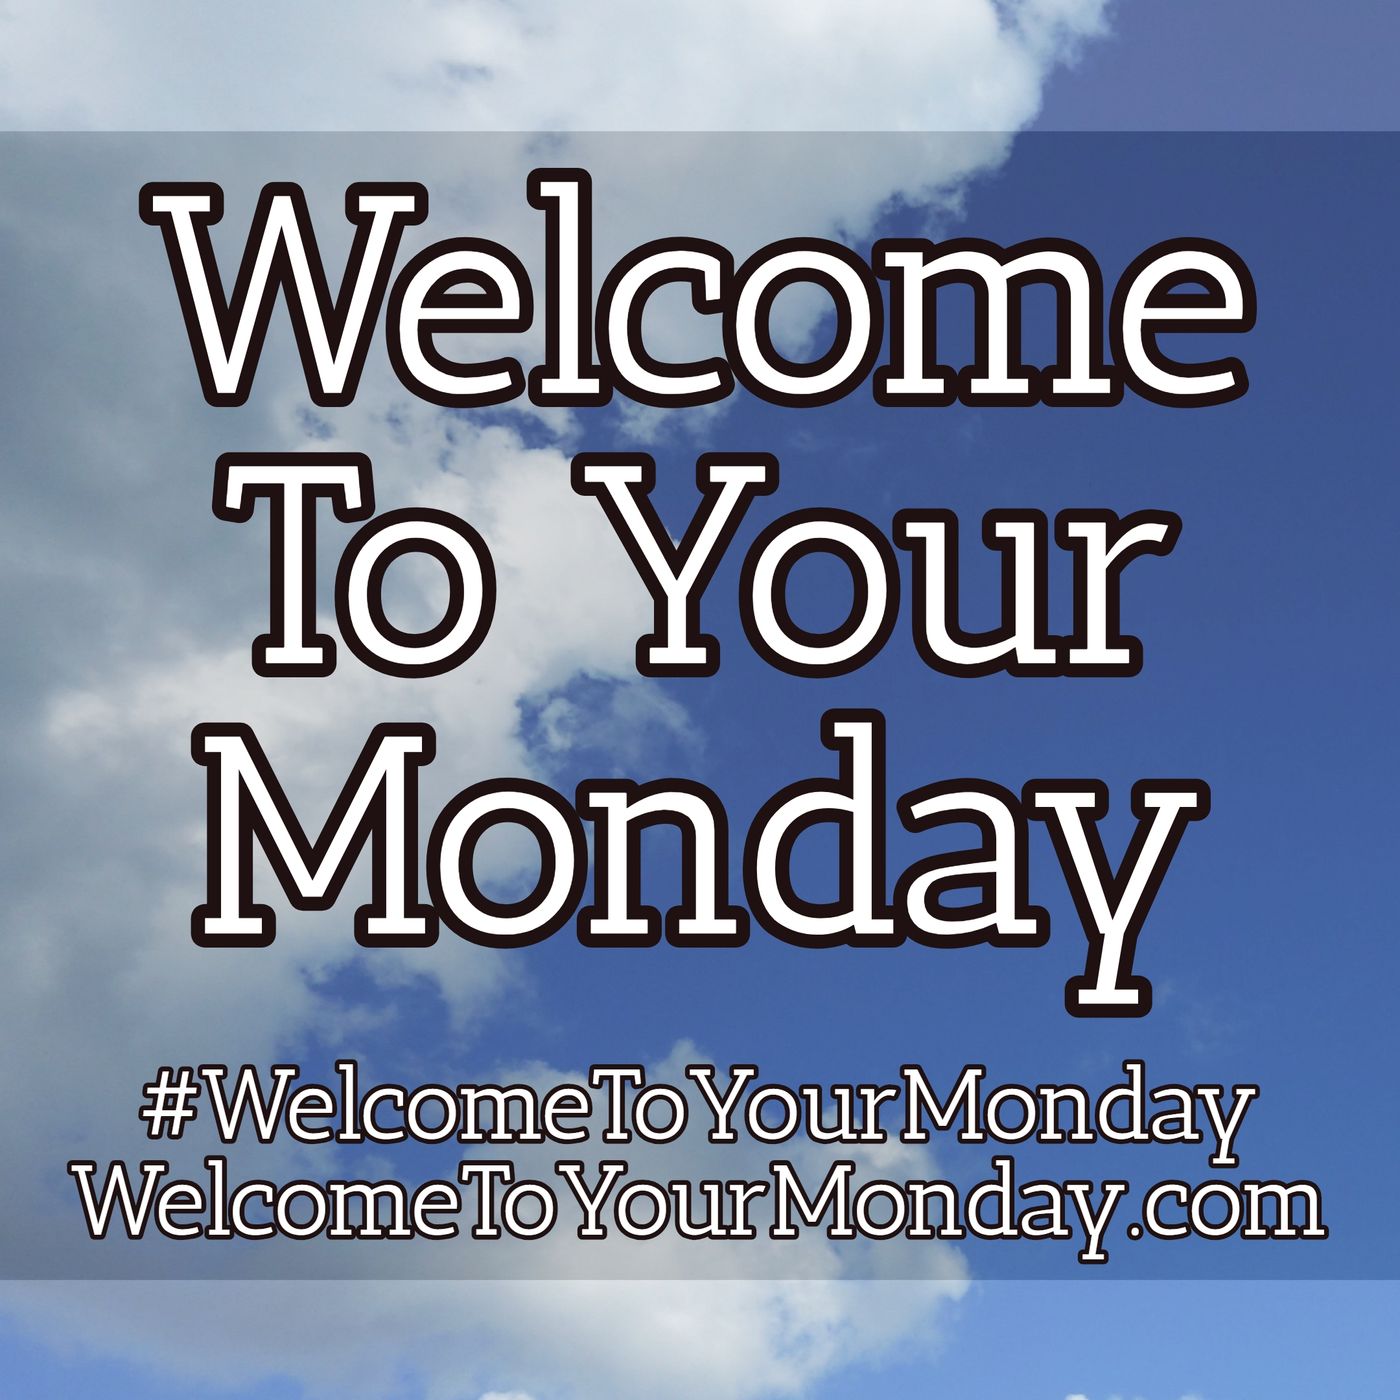 Welcome To Your Monday Message For 8/6/2018